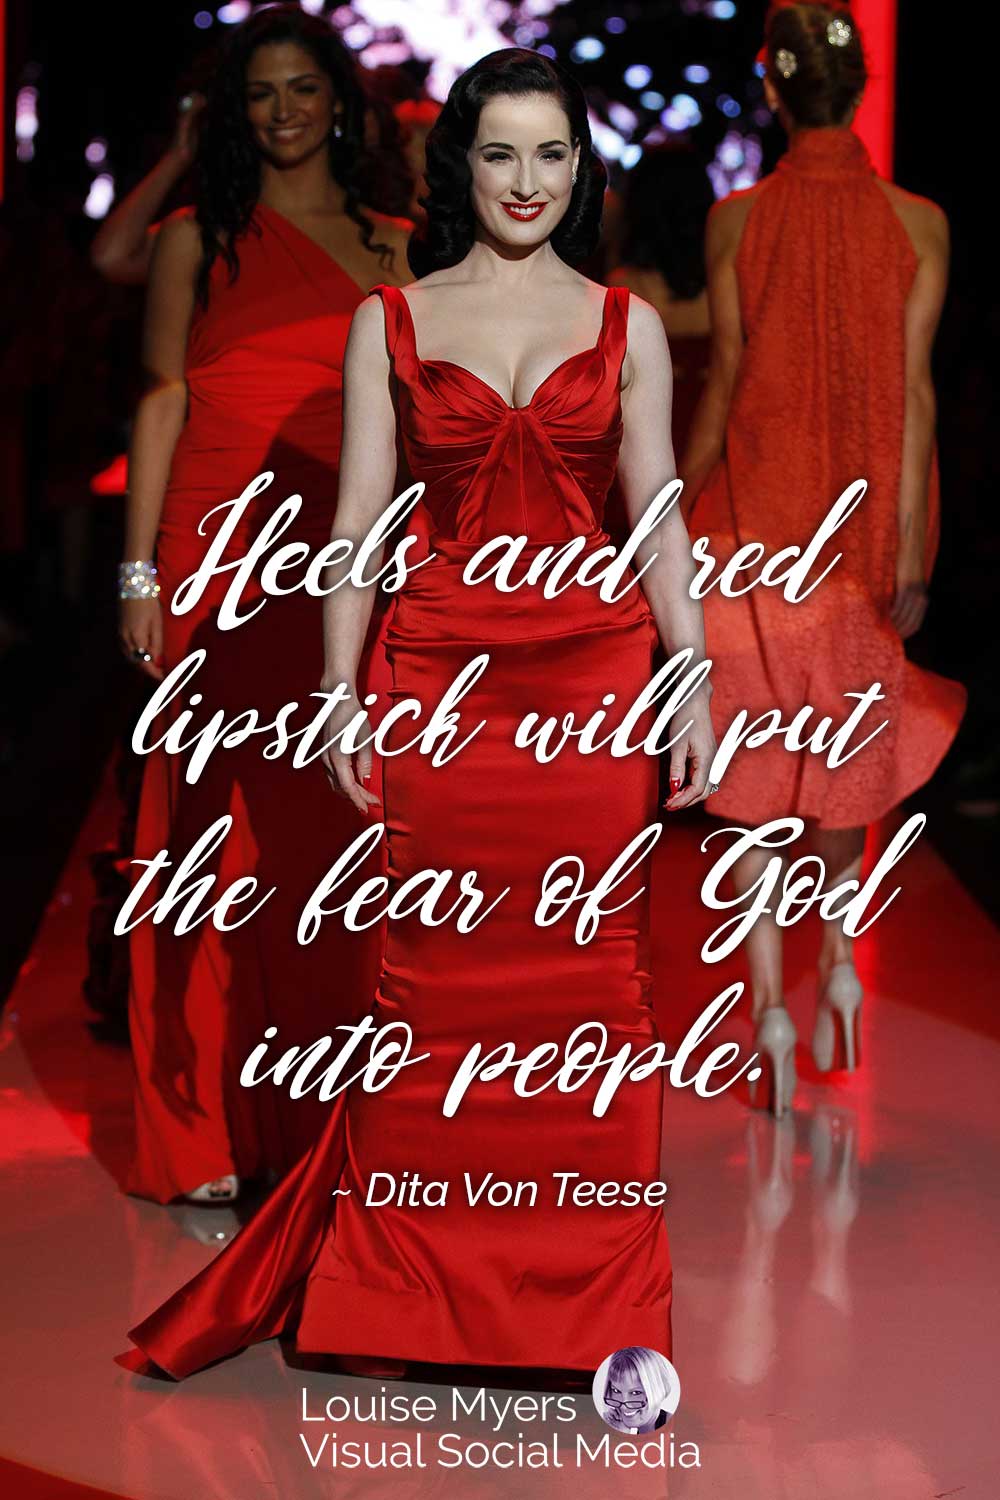 Dita Von Teese in red dress with quote about red lipstick and heels.